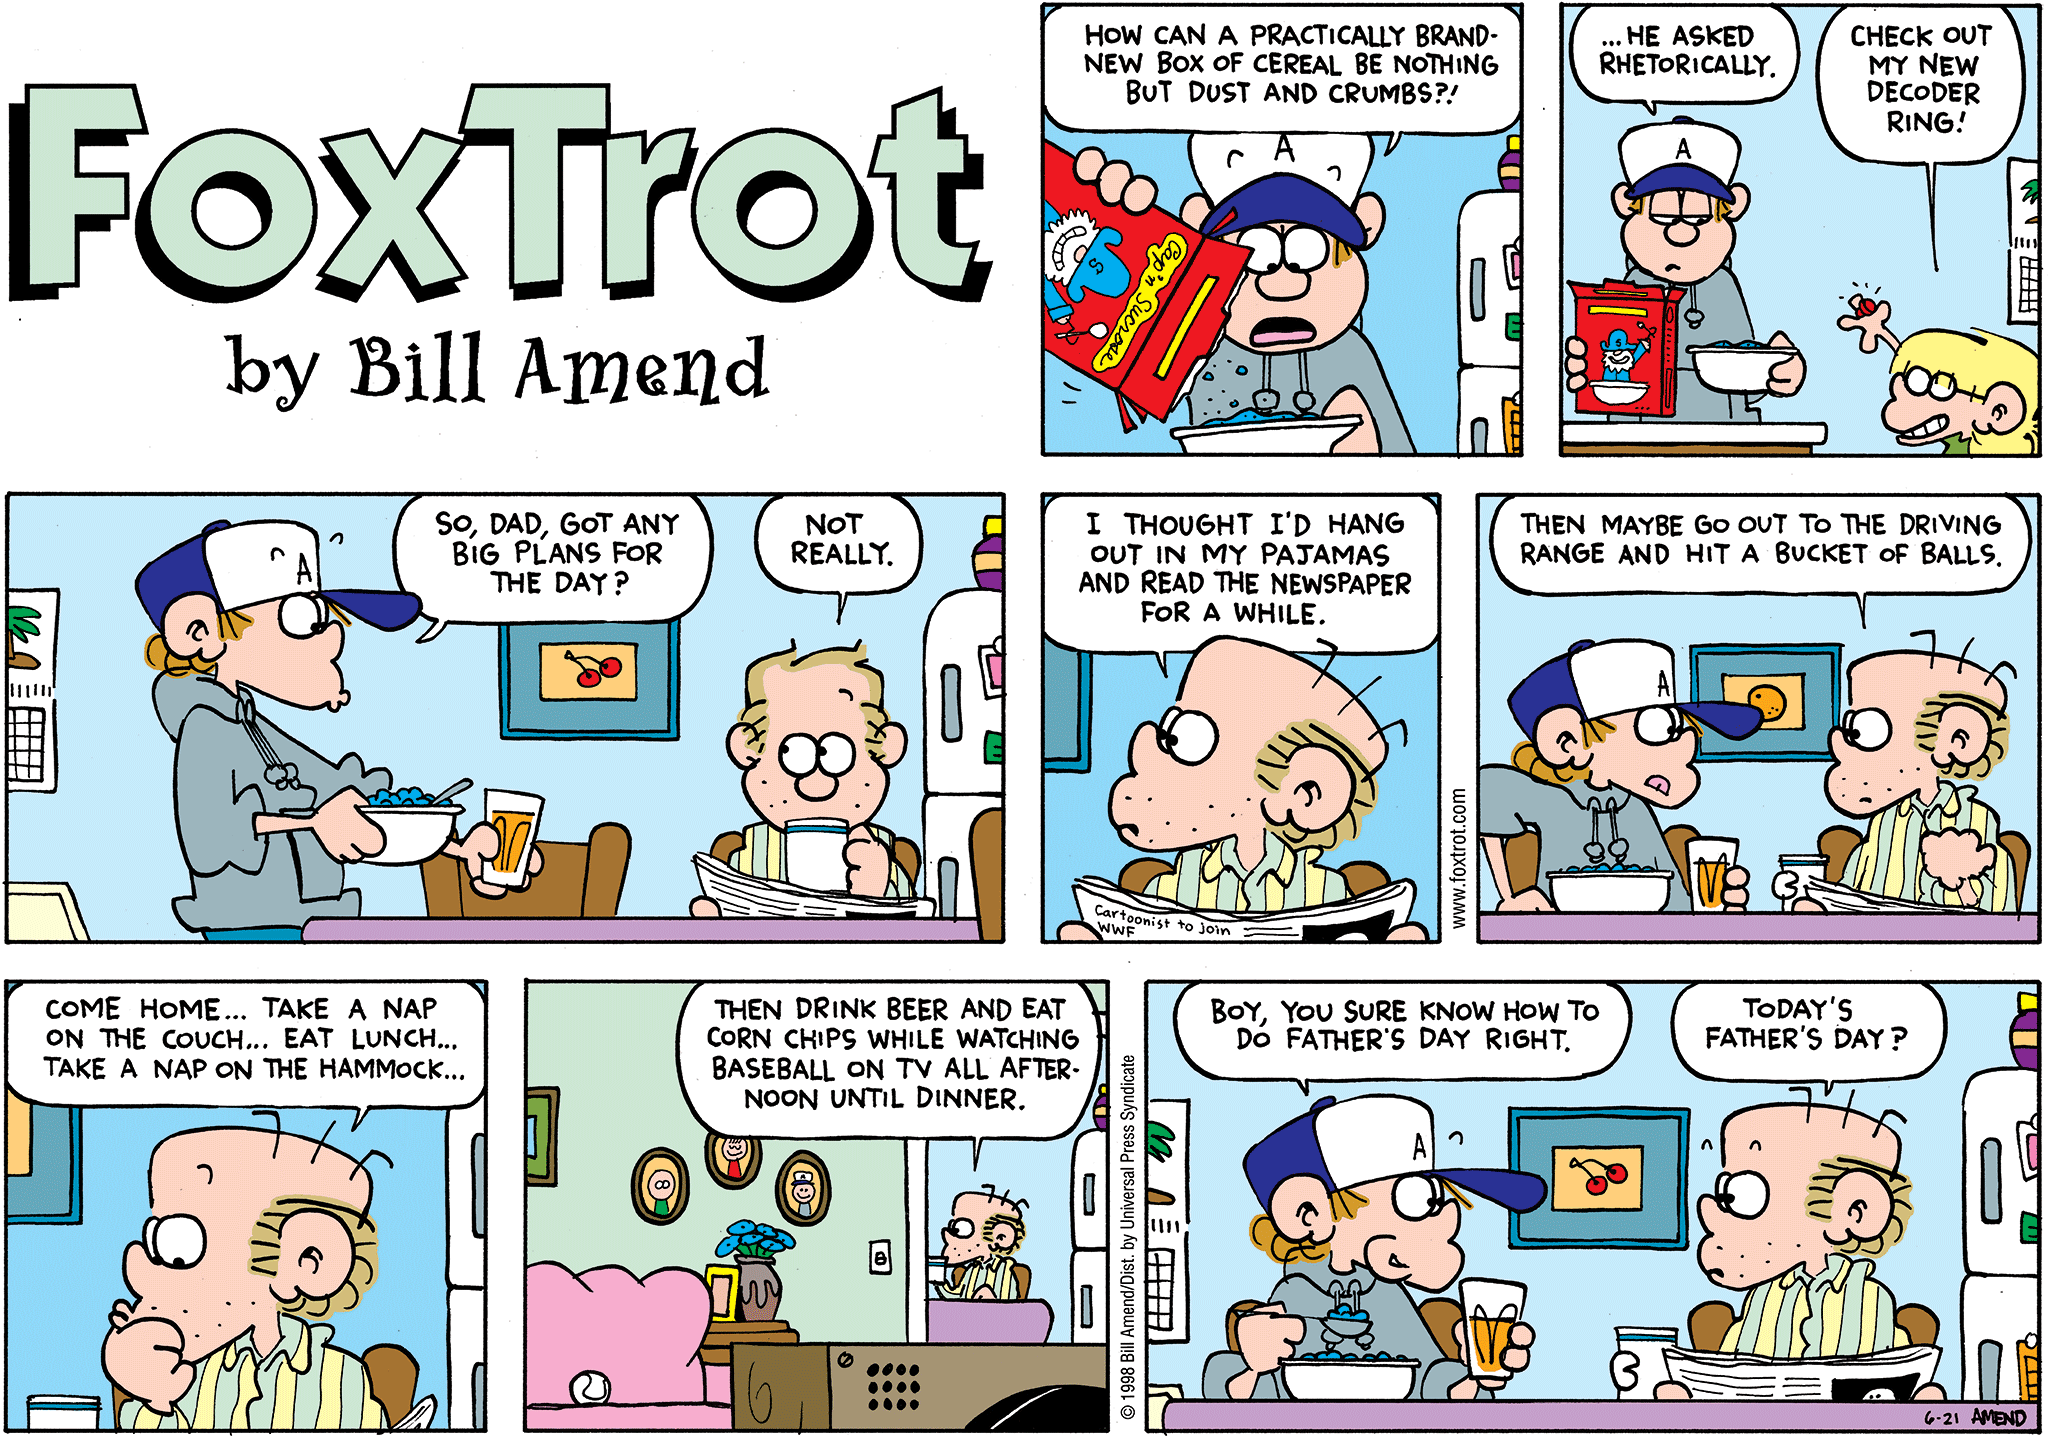 FoxTrot by Bill Amend - Father's Day comic published June 21, 1998 - Peter Fox: How can a practically brand-new box of cereal be nothing but dust and crumbs?! ...He asked rhetorically. Jason Fox: Check out my new decoder ring! Peter Fox: So, Dad, got any big plans for the day? Roger Fox: Not really. I thought I'd hang out in my pajamas and read the newspaper for a while. Then maybe go out to the driving range and hit a bucket of balls. Come home..Take a nap on the couch...eat lunch...take a nap on the hammock...Then drink beer and eat corn chips while watching baseball on TV all afternoon until dinner. Peter Fox: Boy, you sure knon how to do Father's Day right. Roger Fox: Today's Father's Day?